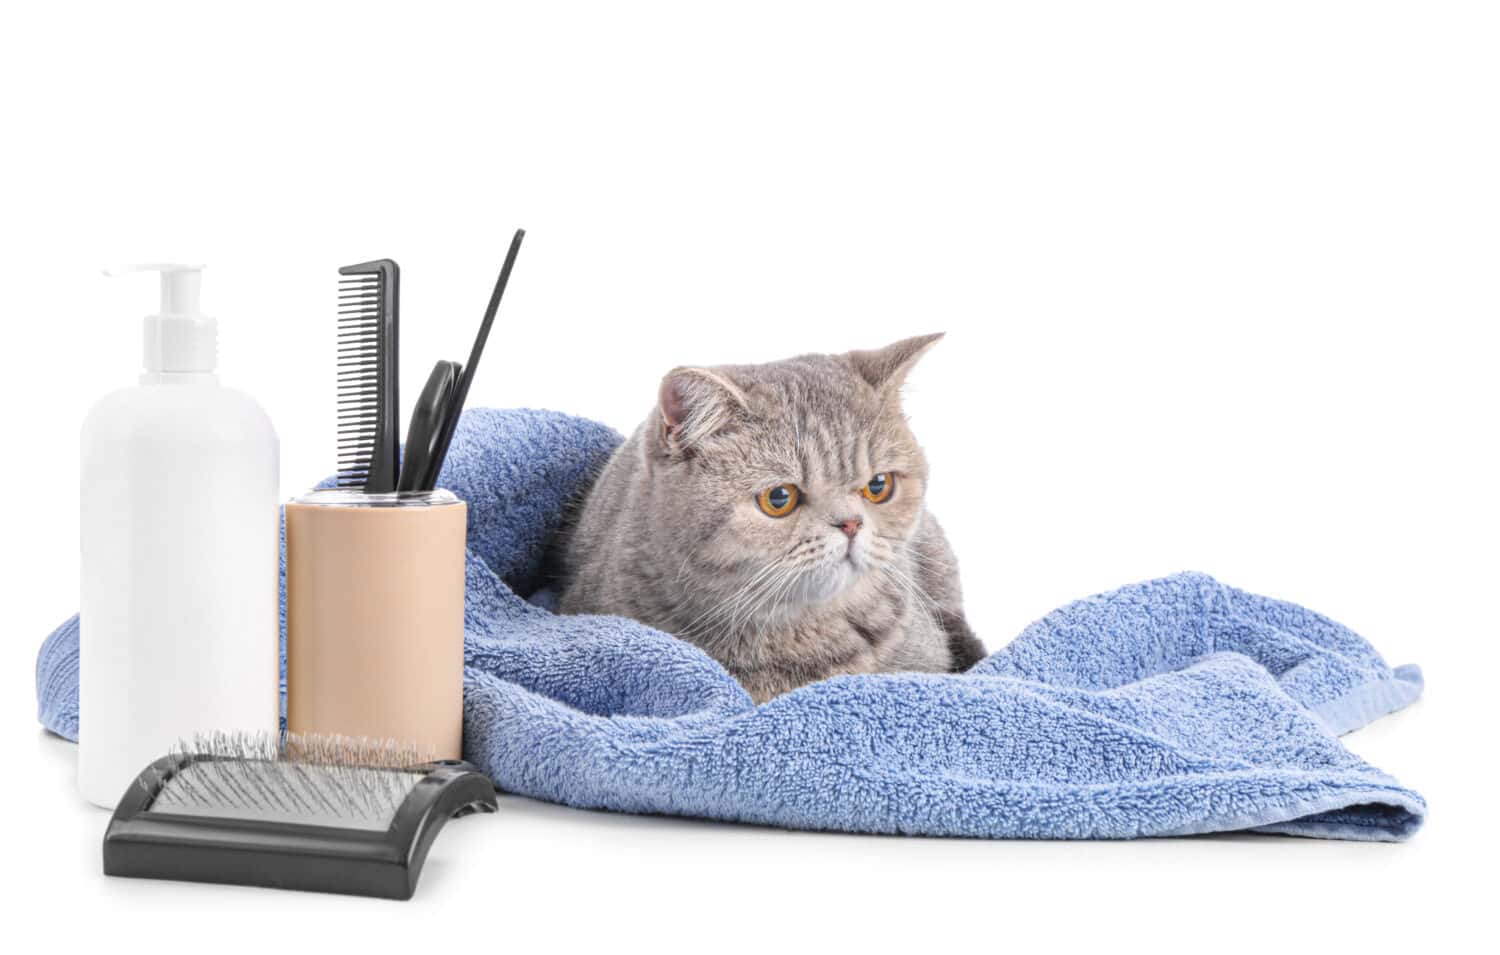 Cute cat with towel and grooming tools on white background